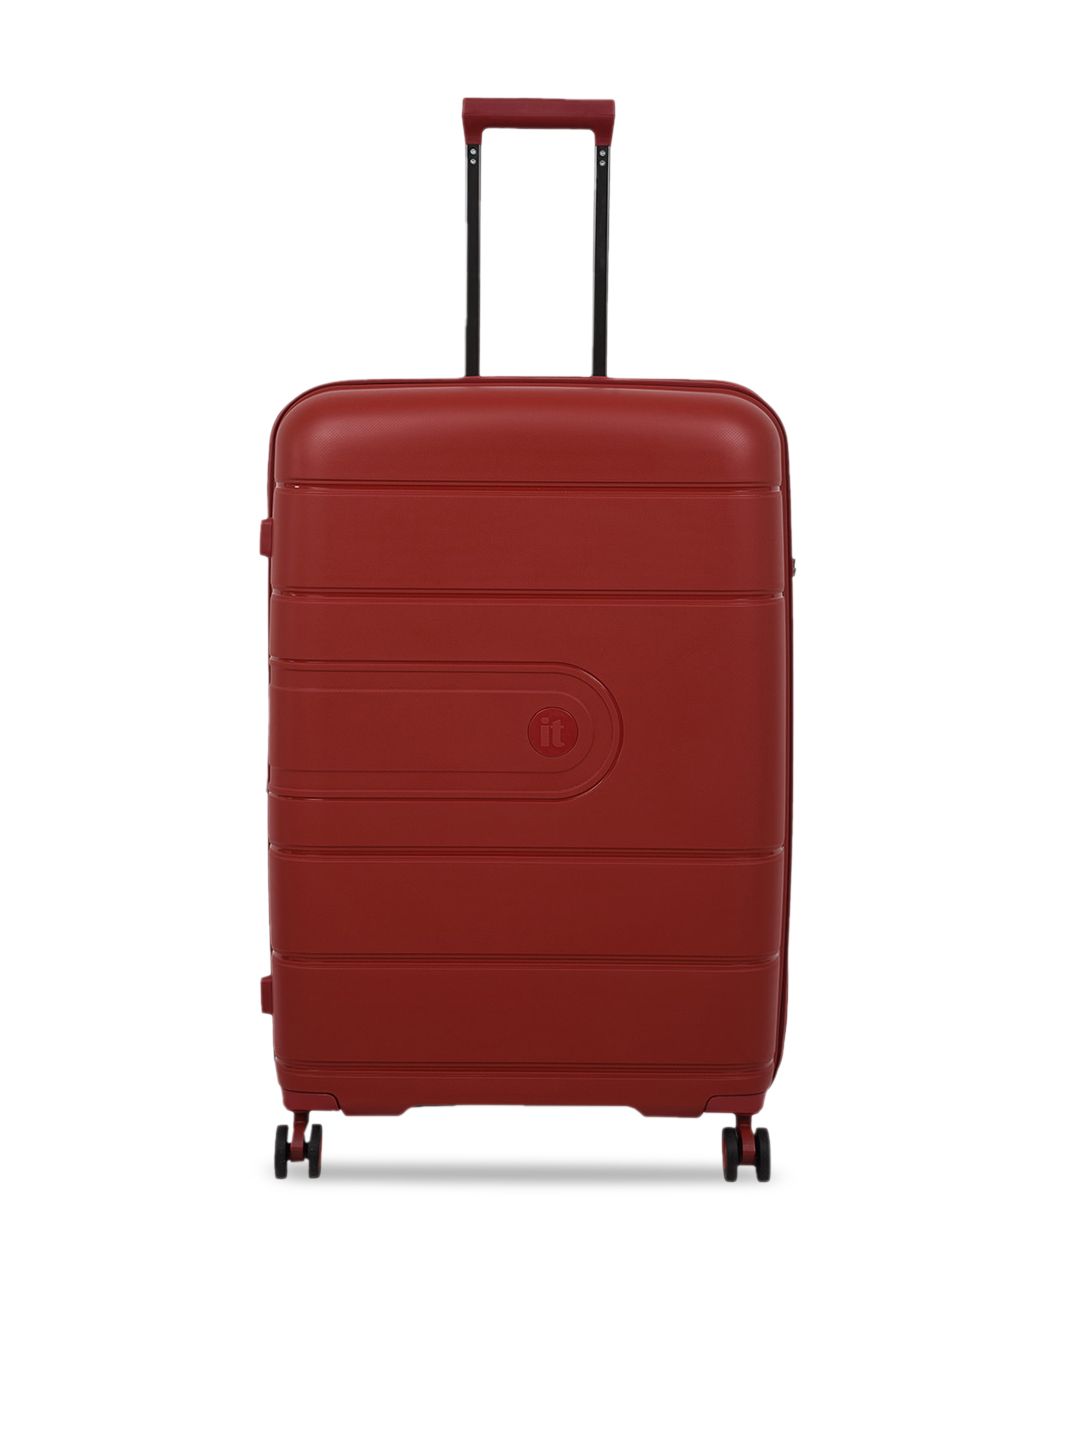 IT luggage Red Solid Hard-Sided Trolley Suitcases Price in India